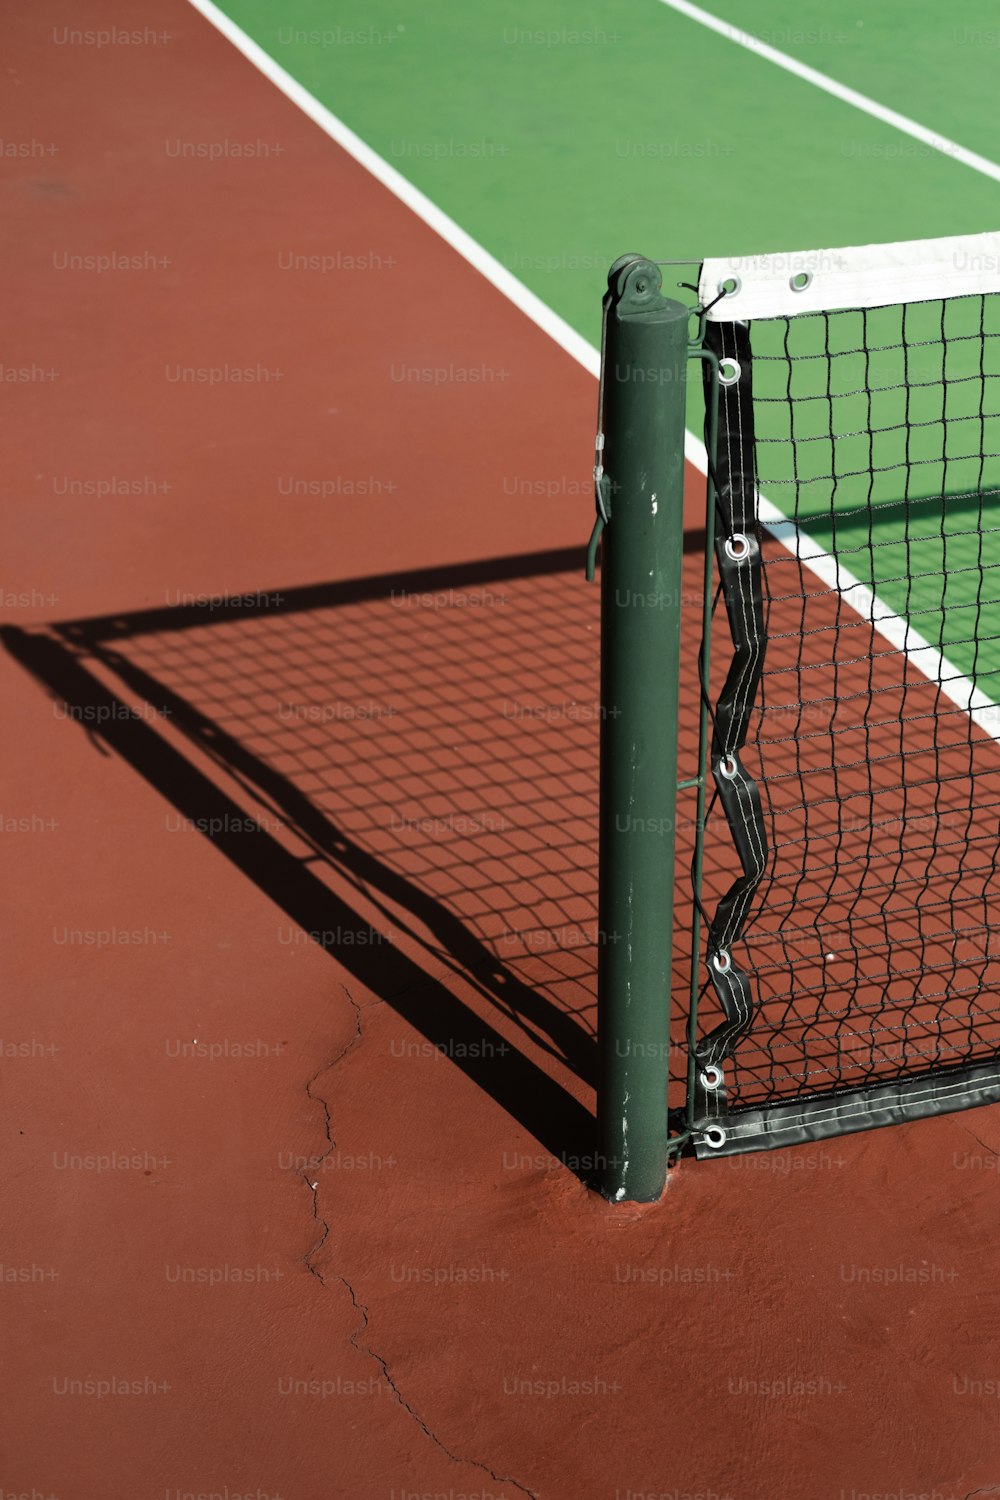 a tennis court with a net on the ground